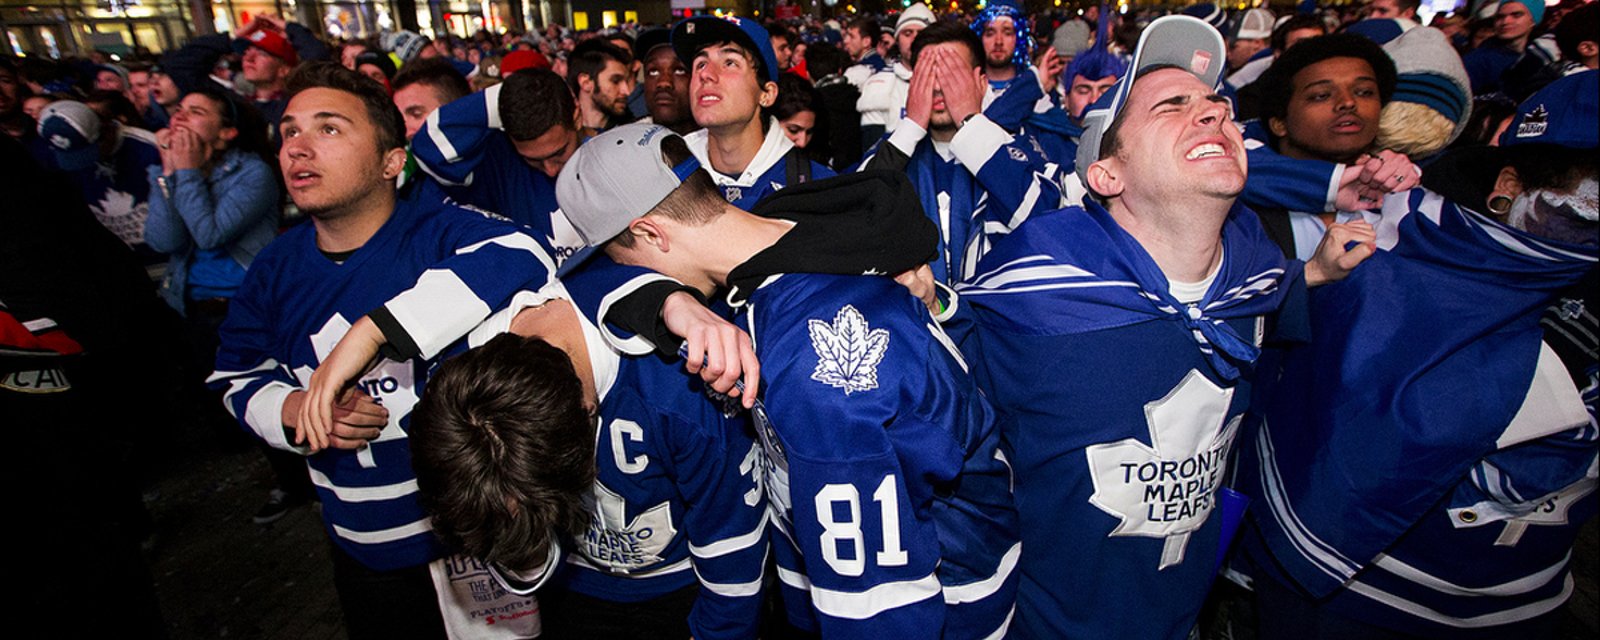 The Leafs are no longer the most valuable team in Canada